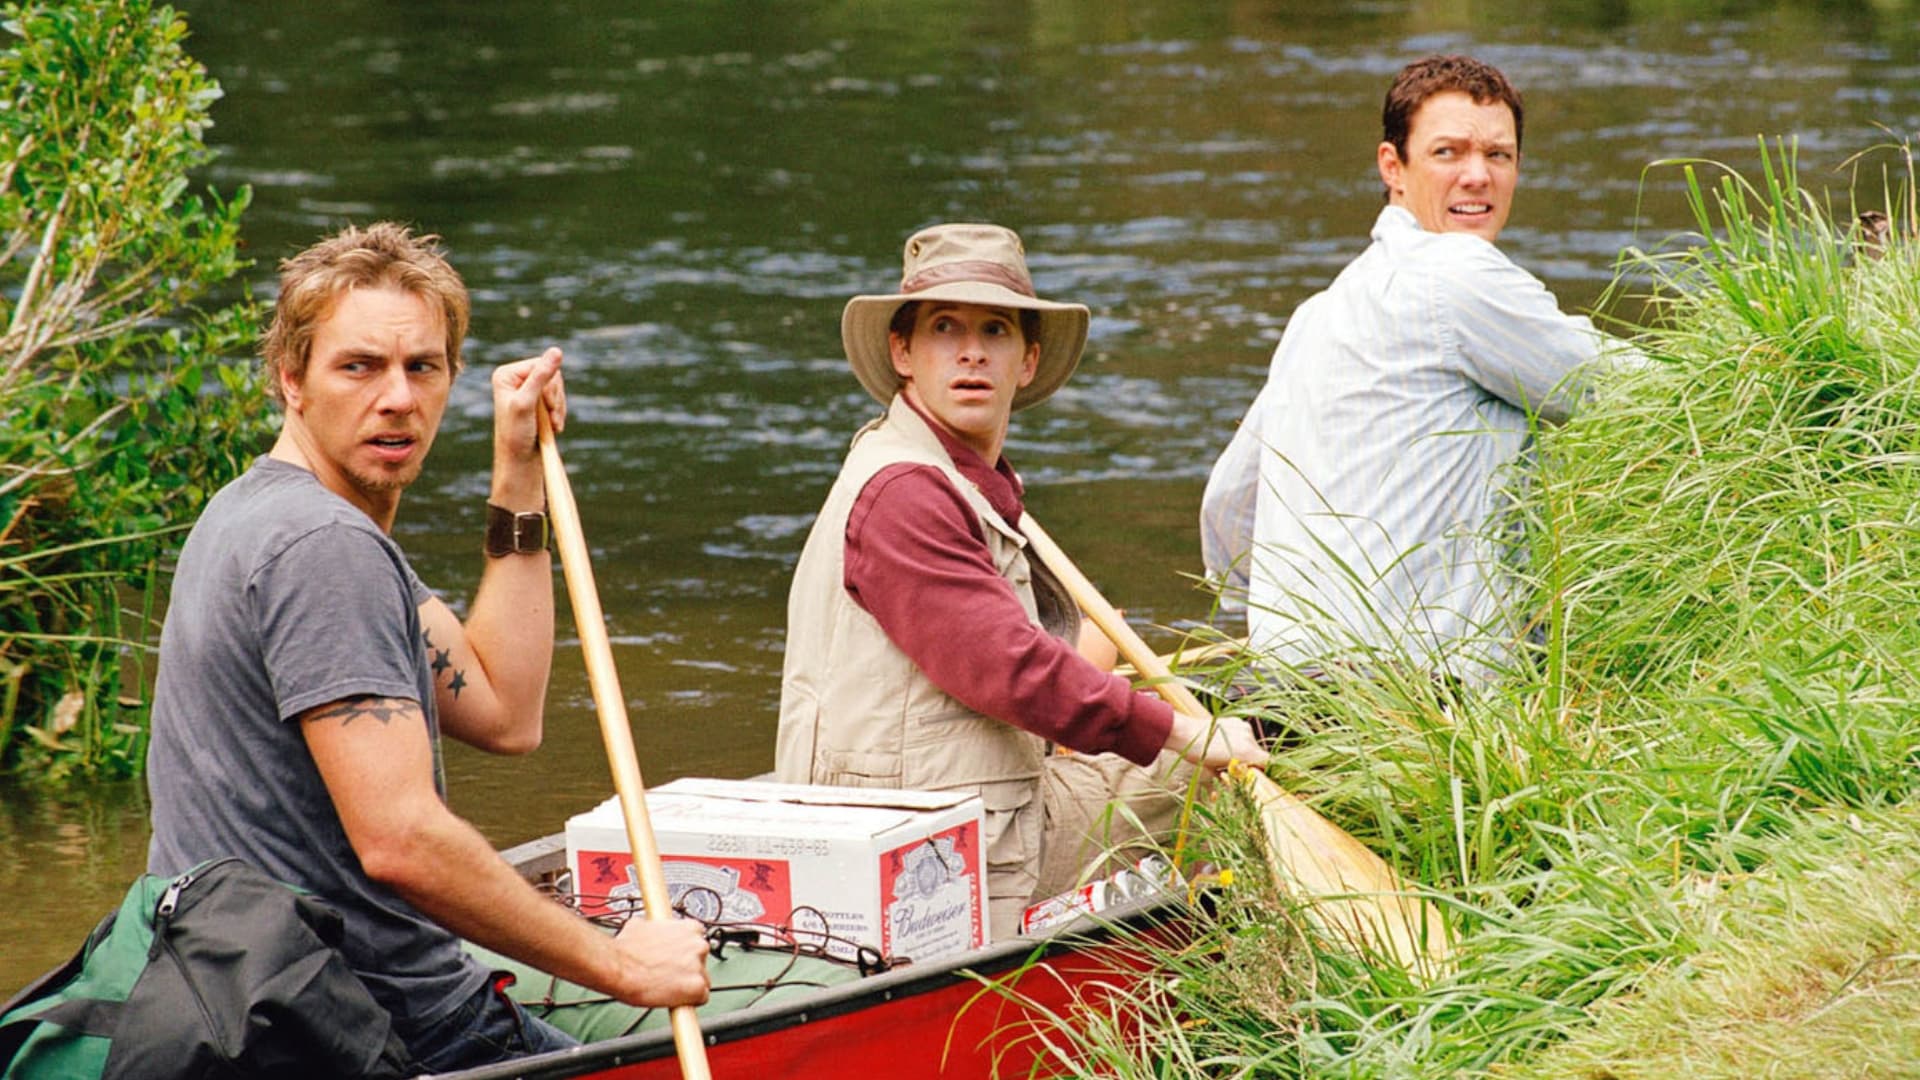 Without a Paddle (2004)